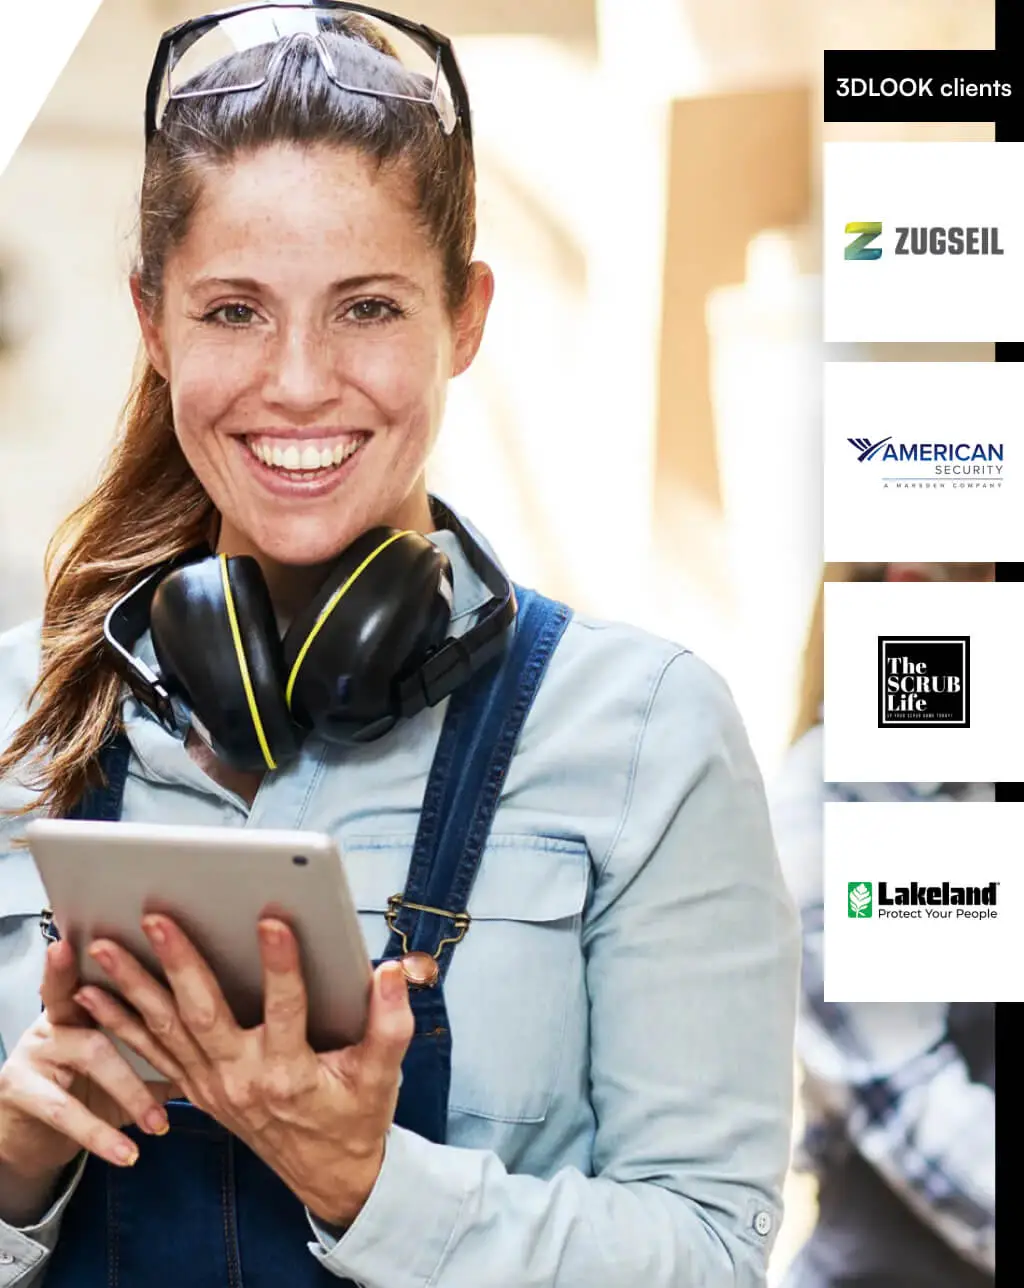 An image of a woman wearing headphones and holding a tablet.